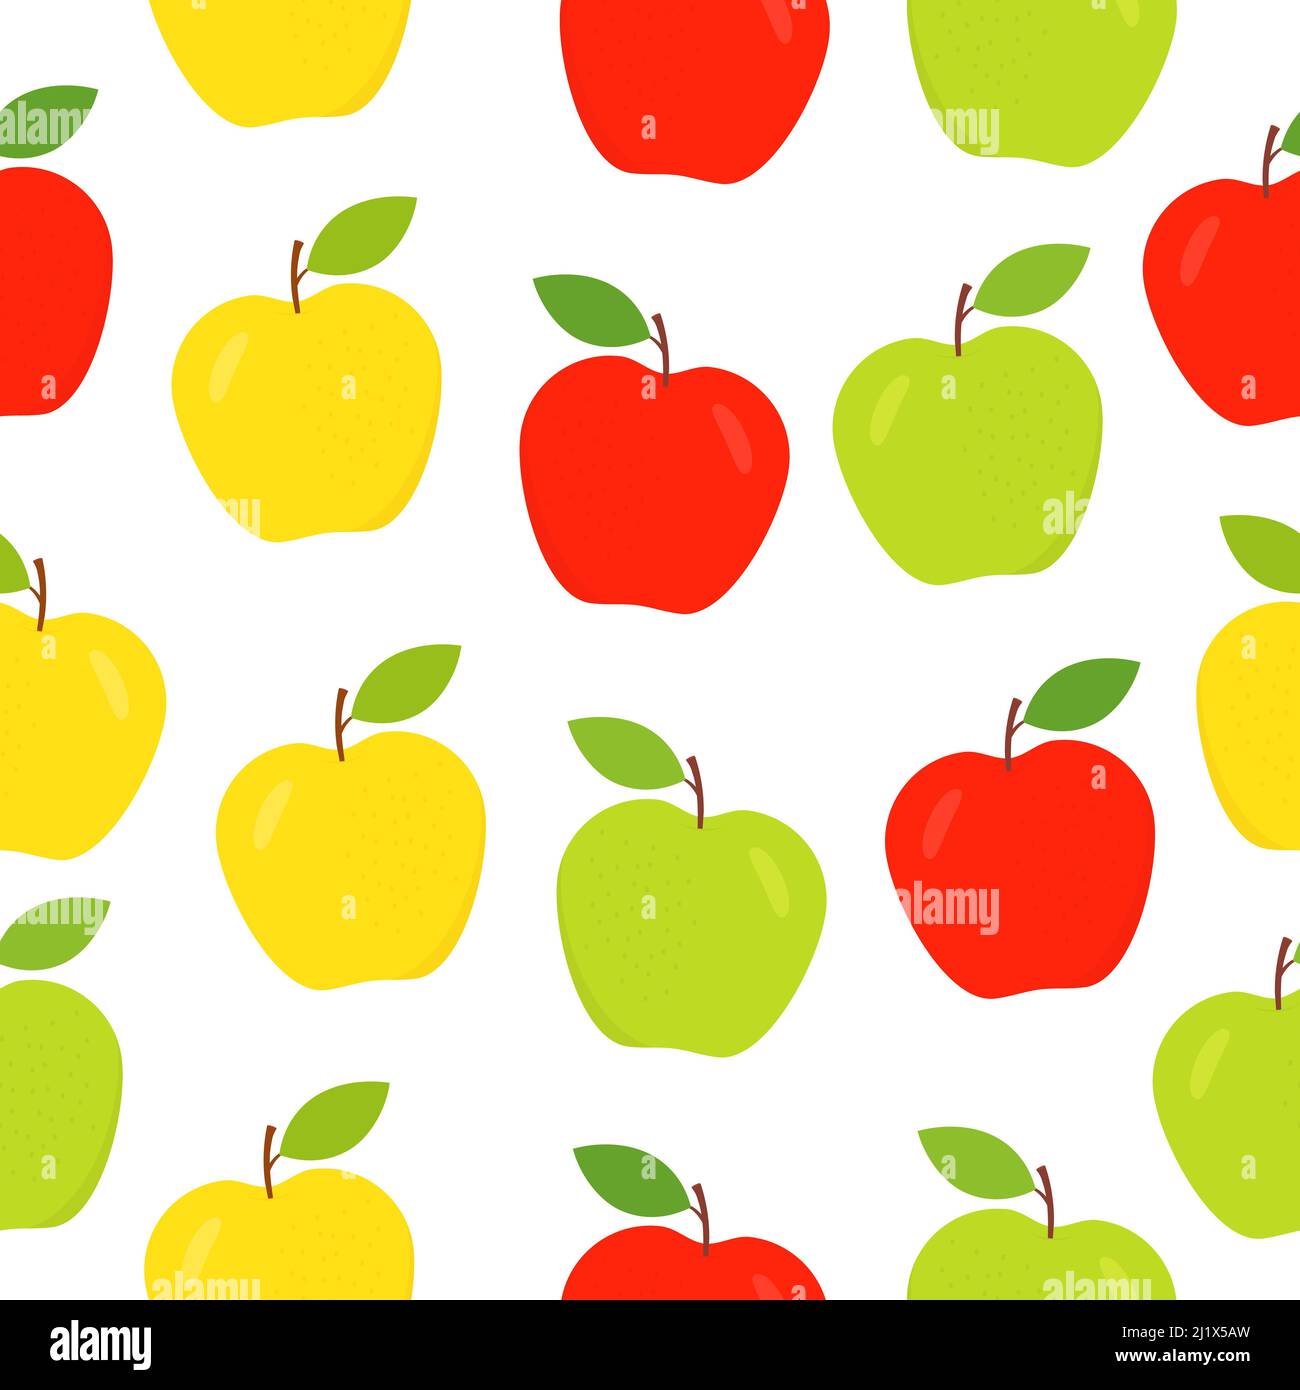 Seamless apple pattern. Sliced green apples white background. Sweet cute fruits texture. Vector illustration Stock Vector